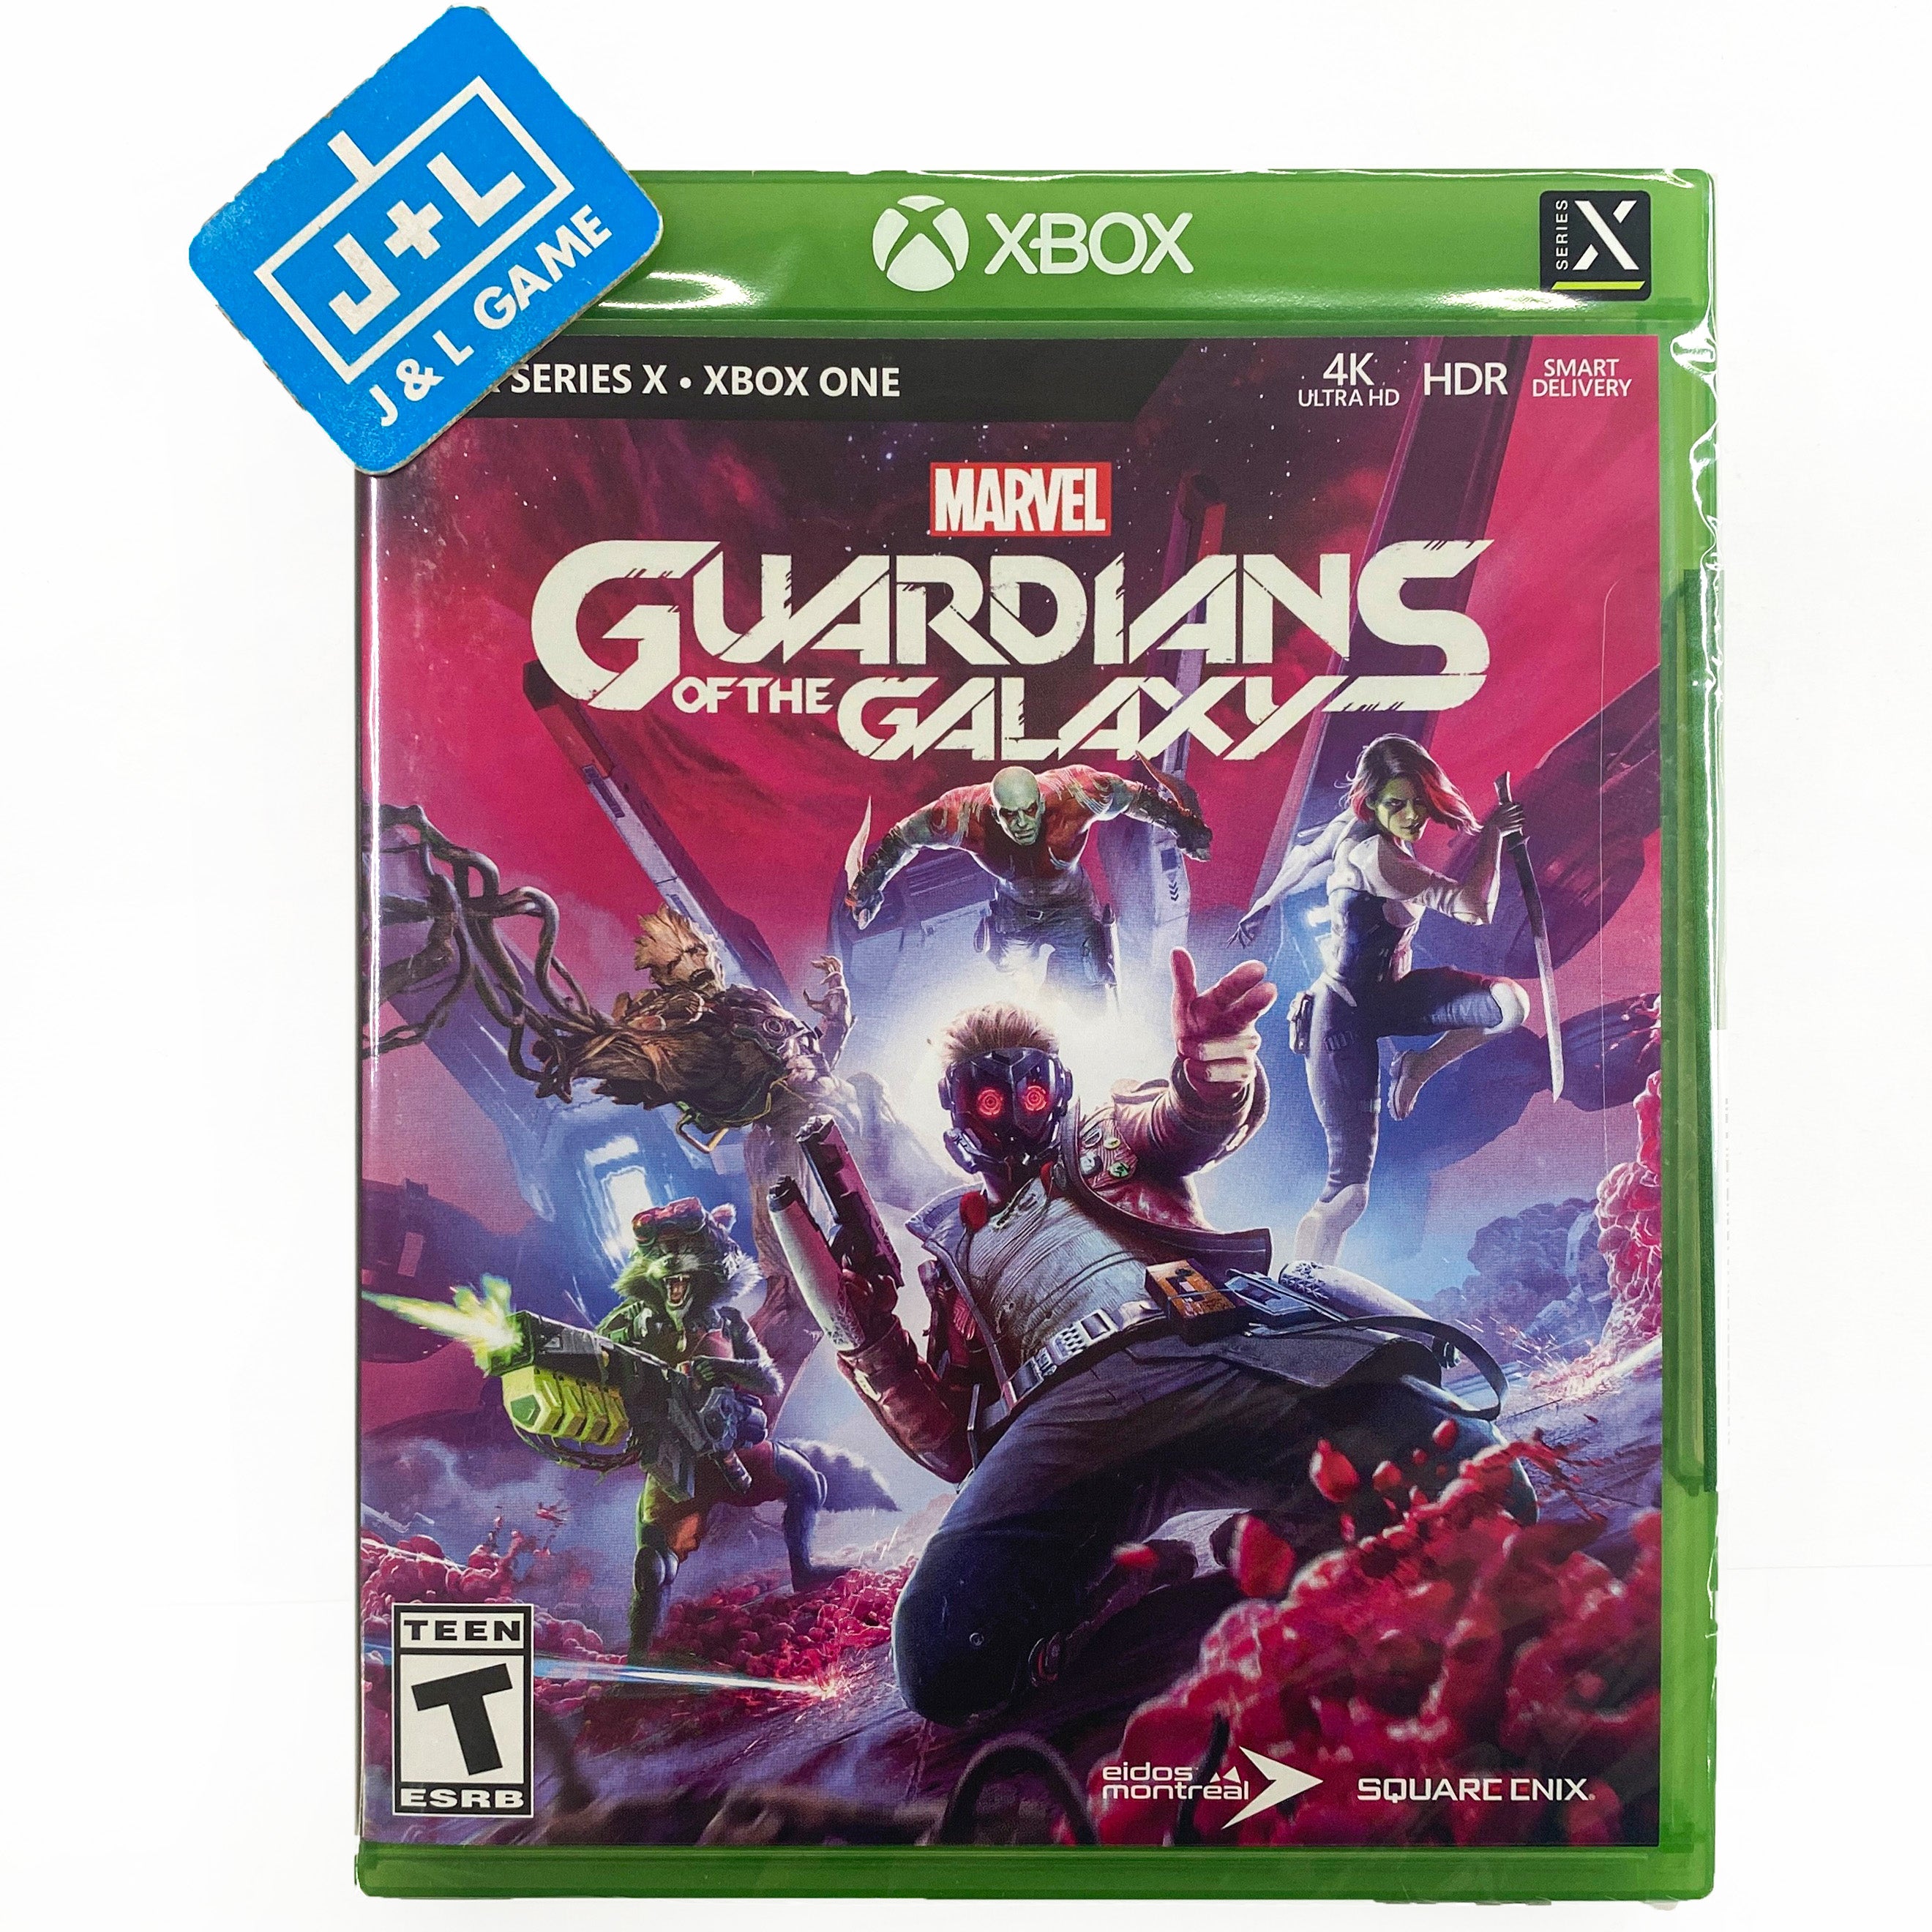 Marvel’s Guardians of the Galaxy - (XSX) Xbox Series X Video Games Square Enix   